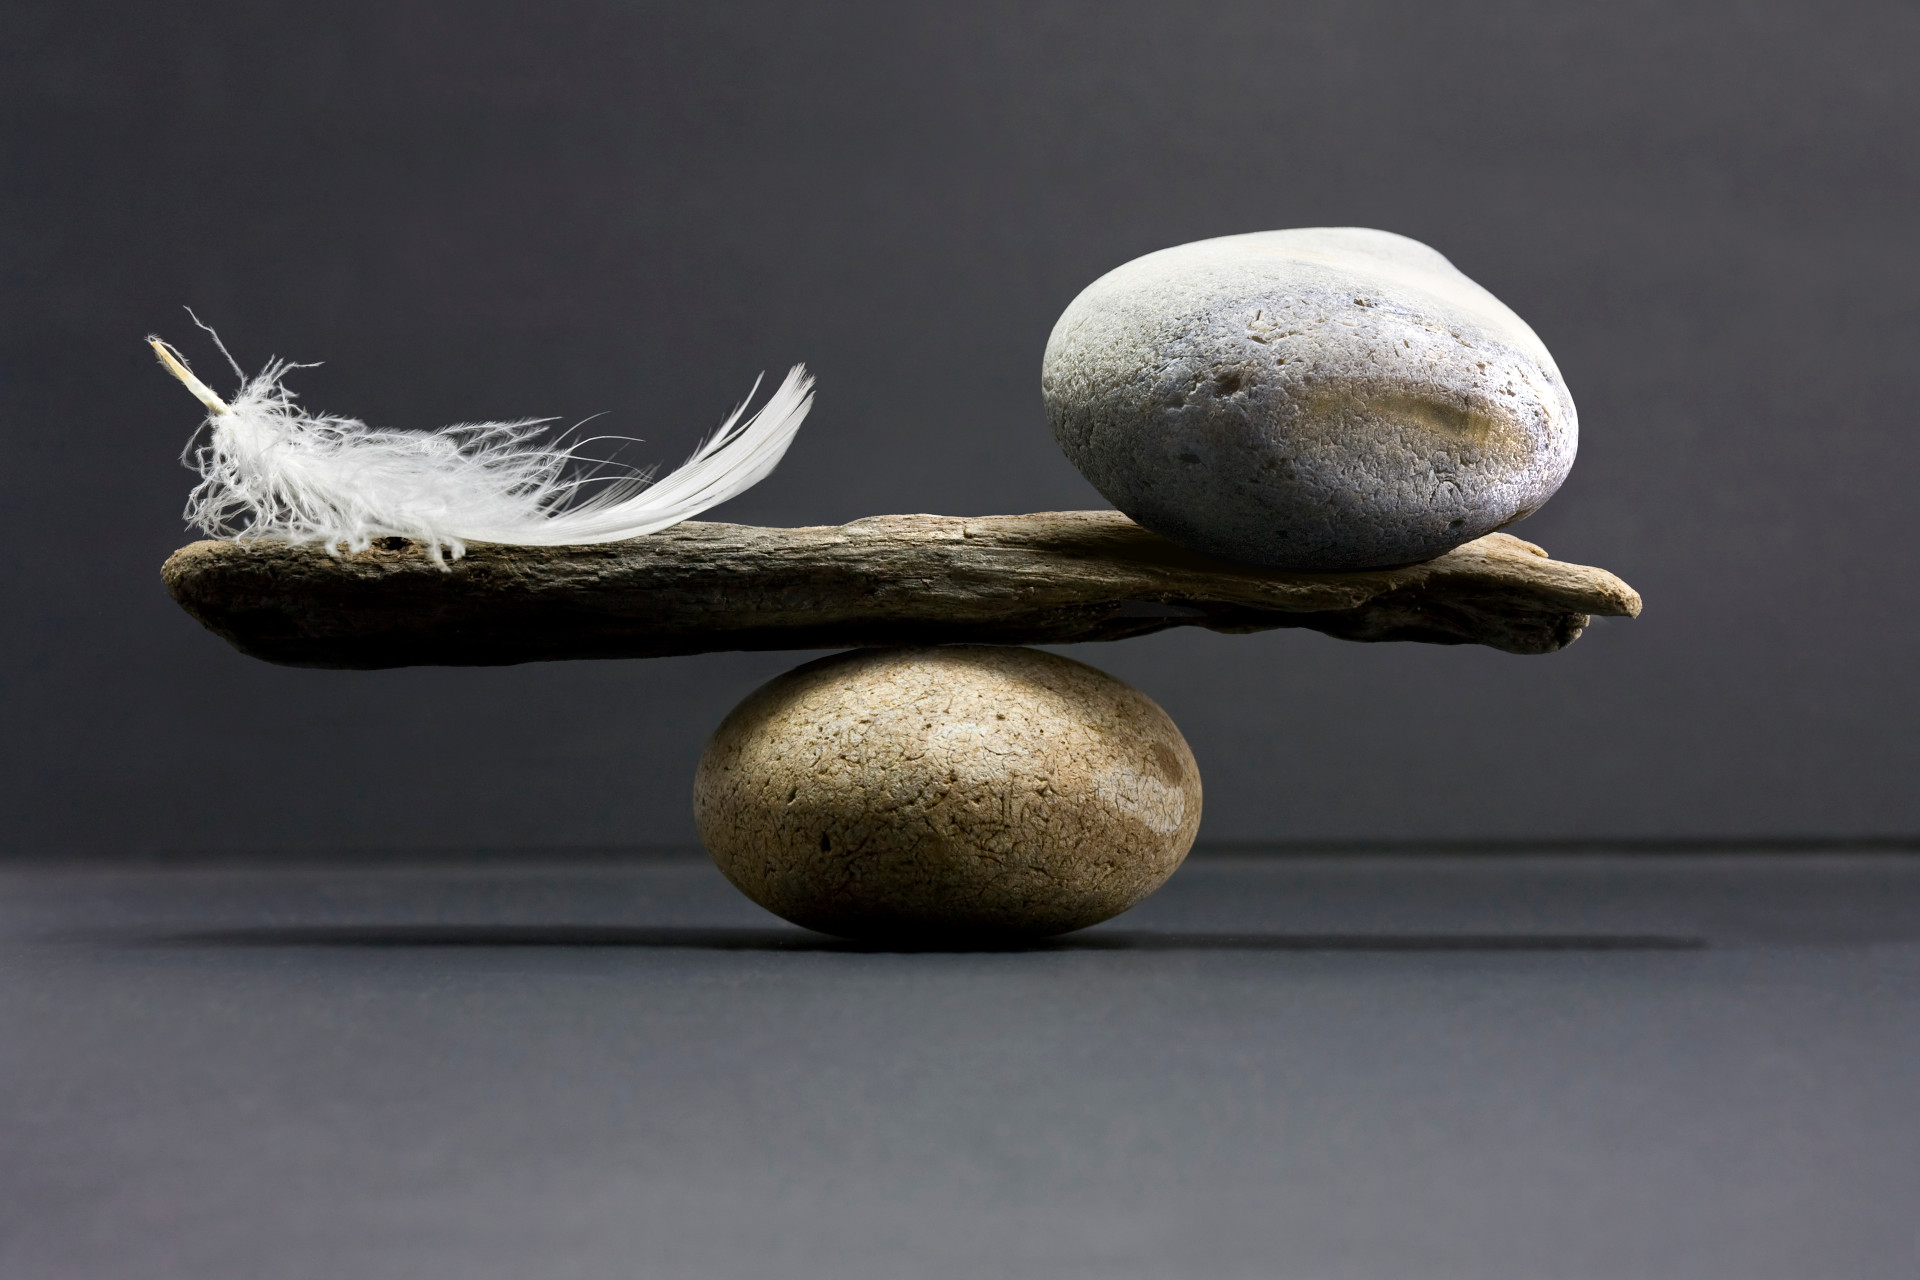 A feather and a stone equally balanced.